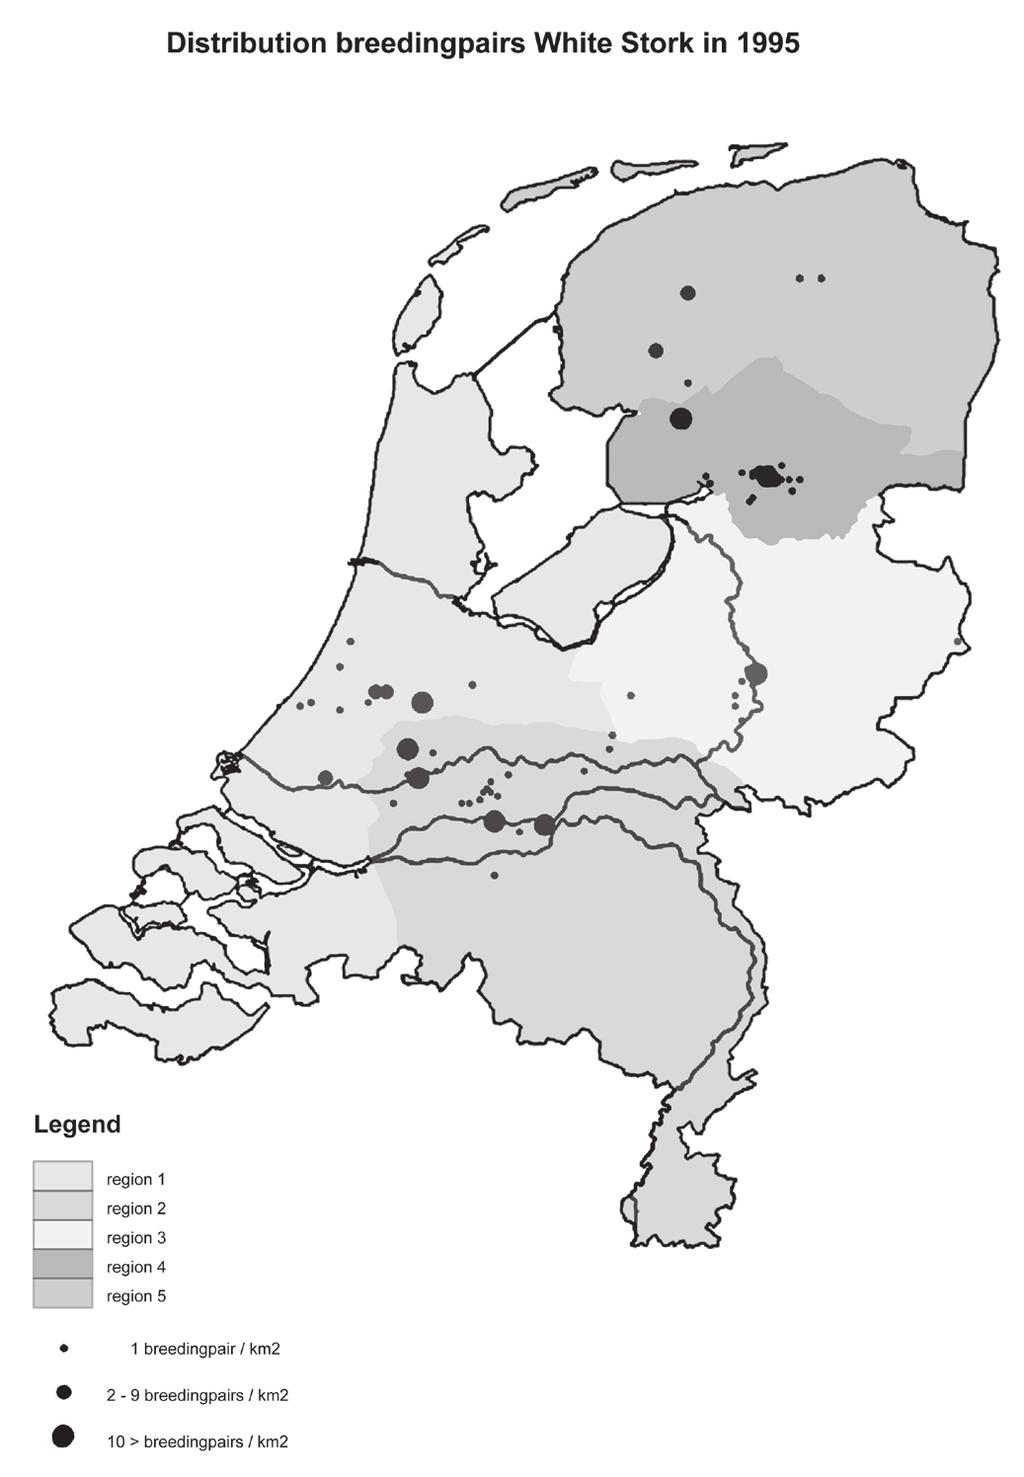 Fig. 1. Distribution of the White Stork in The Netherlands 1995 and 20